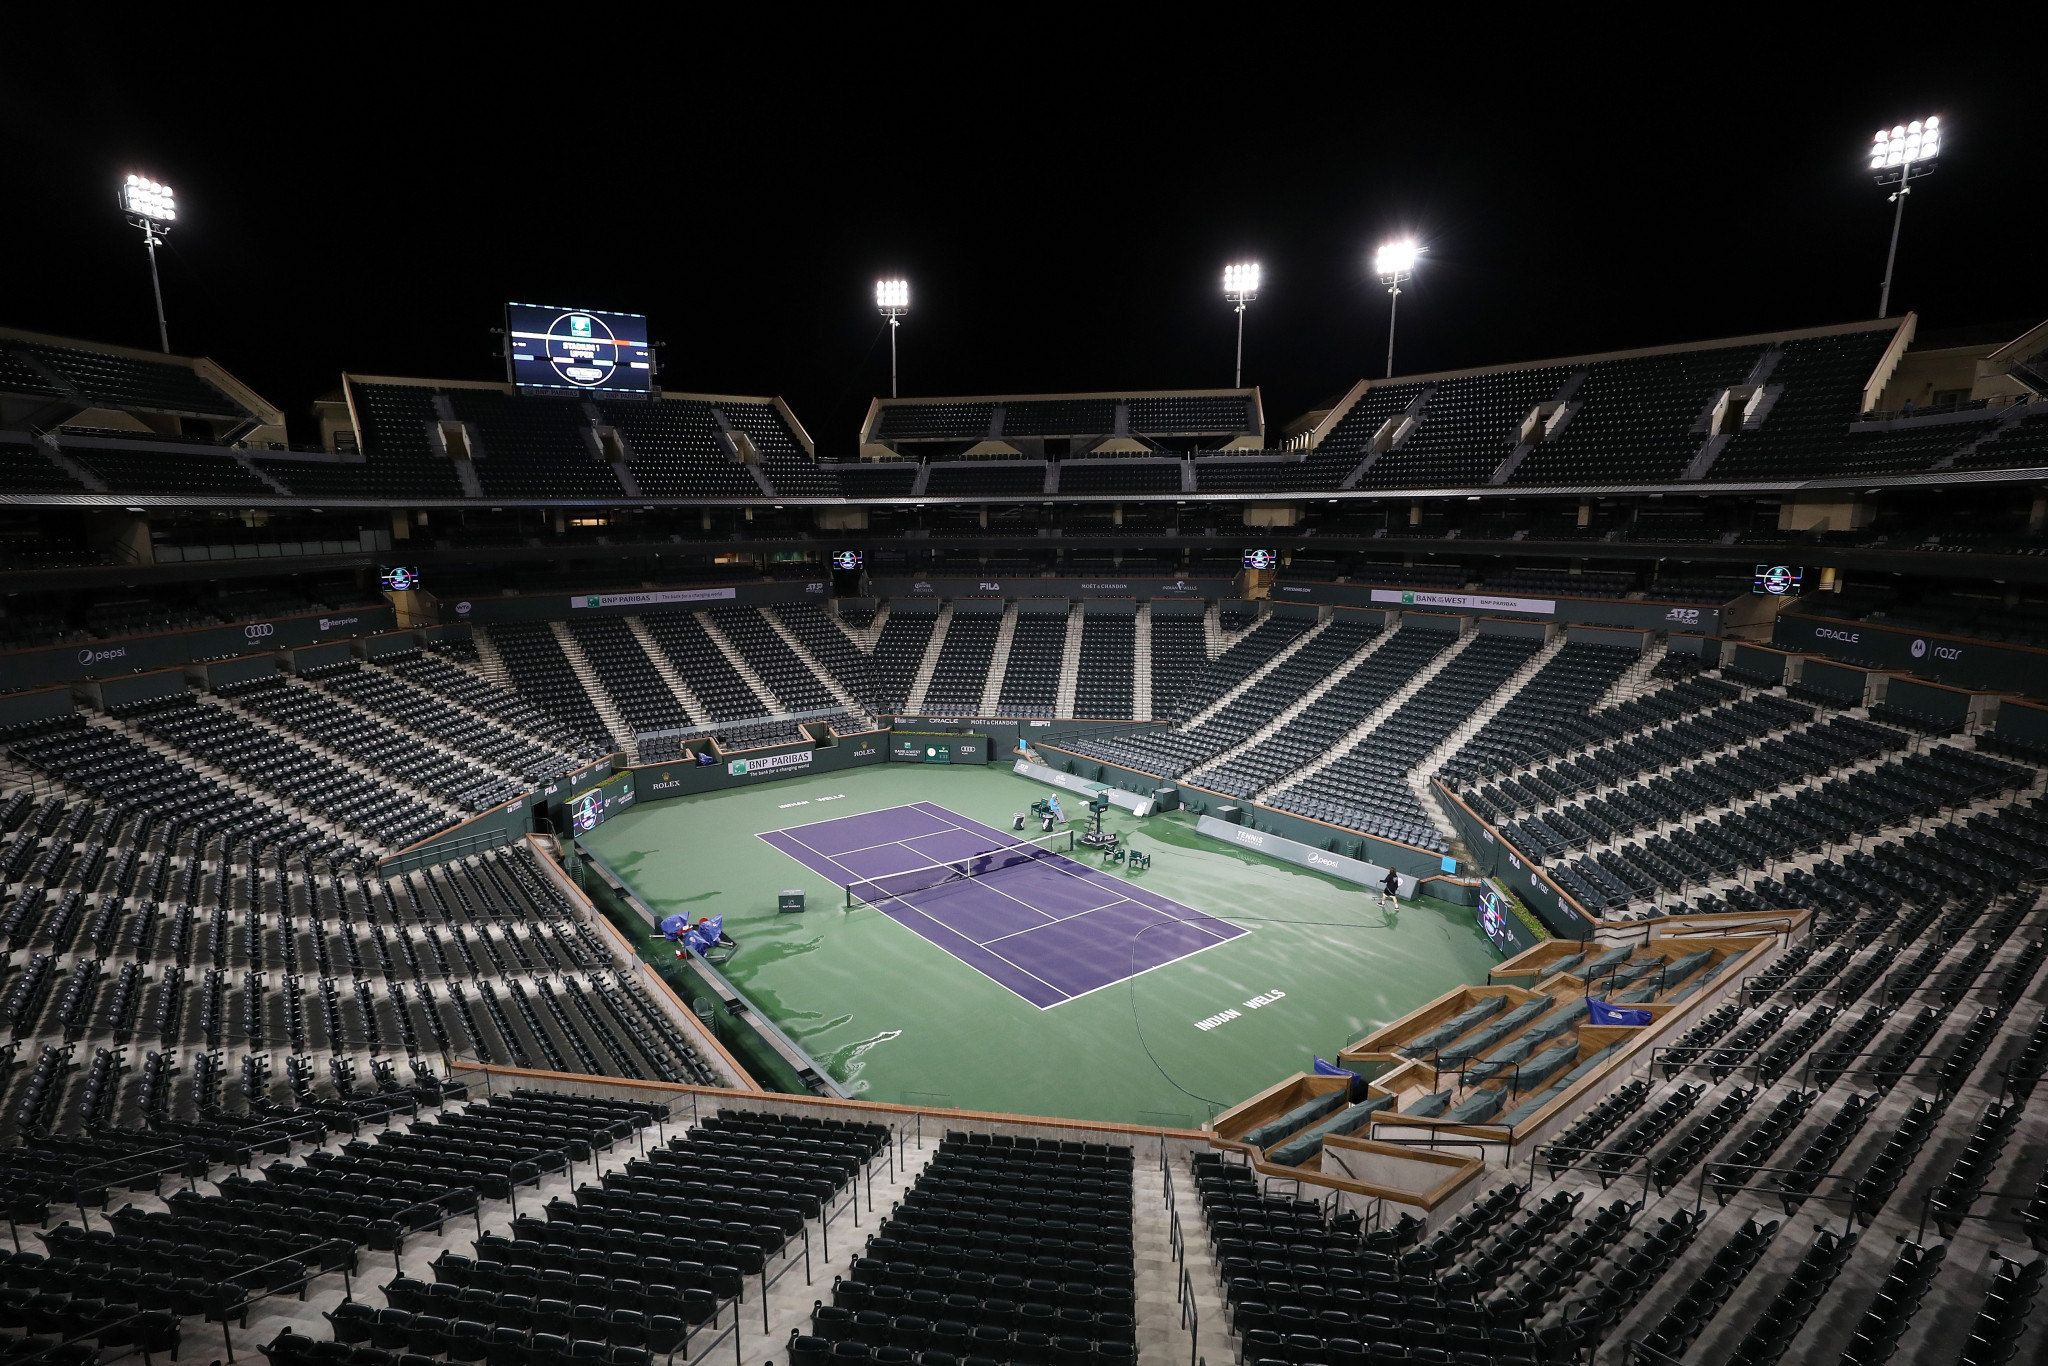 US Open could be moved to Indian Wells if New York unsafe